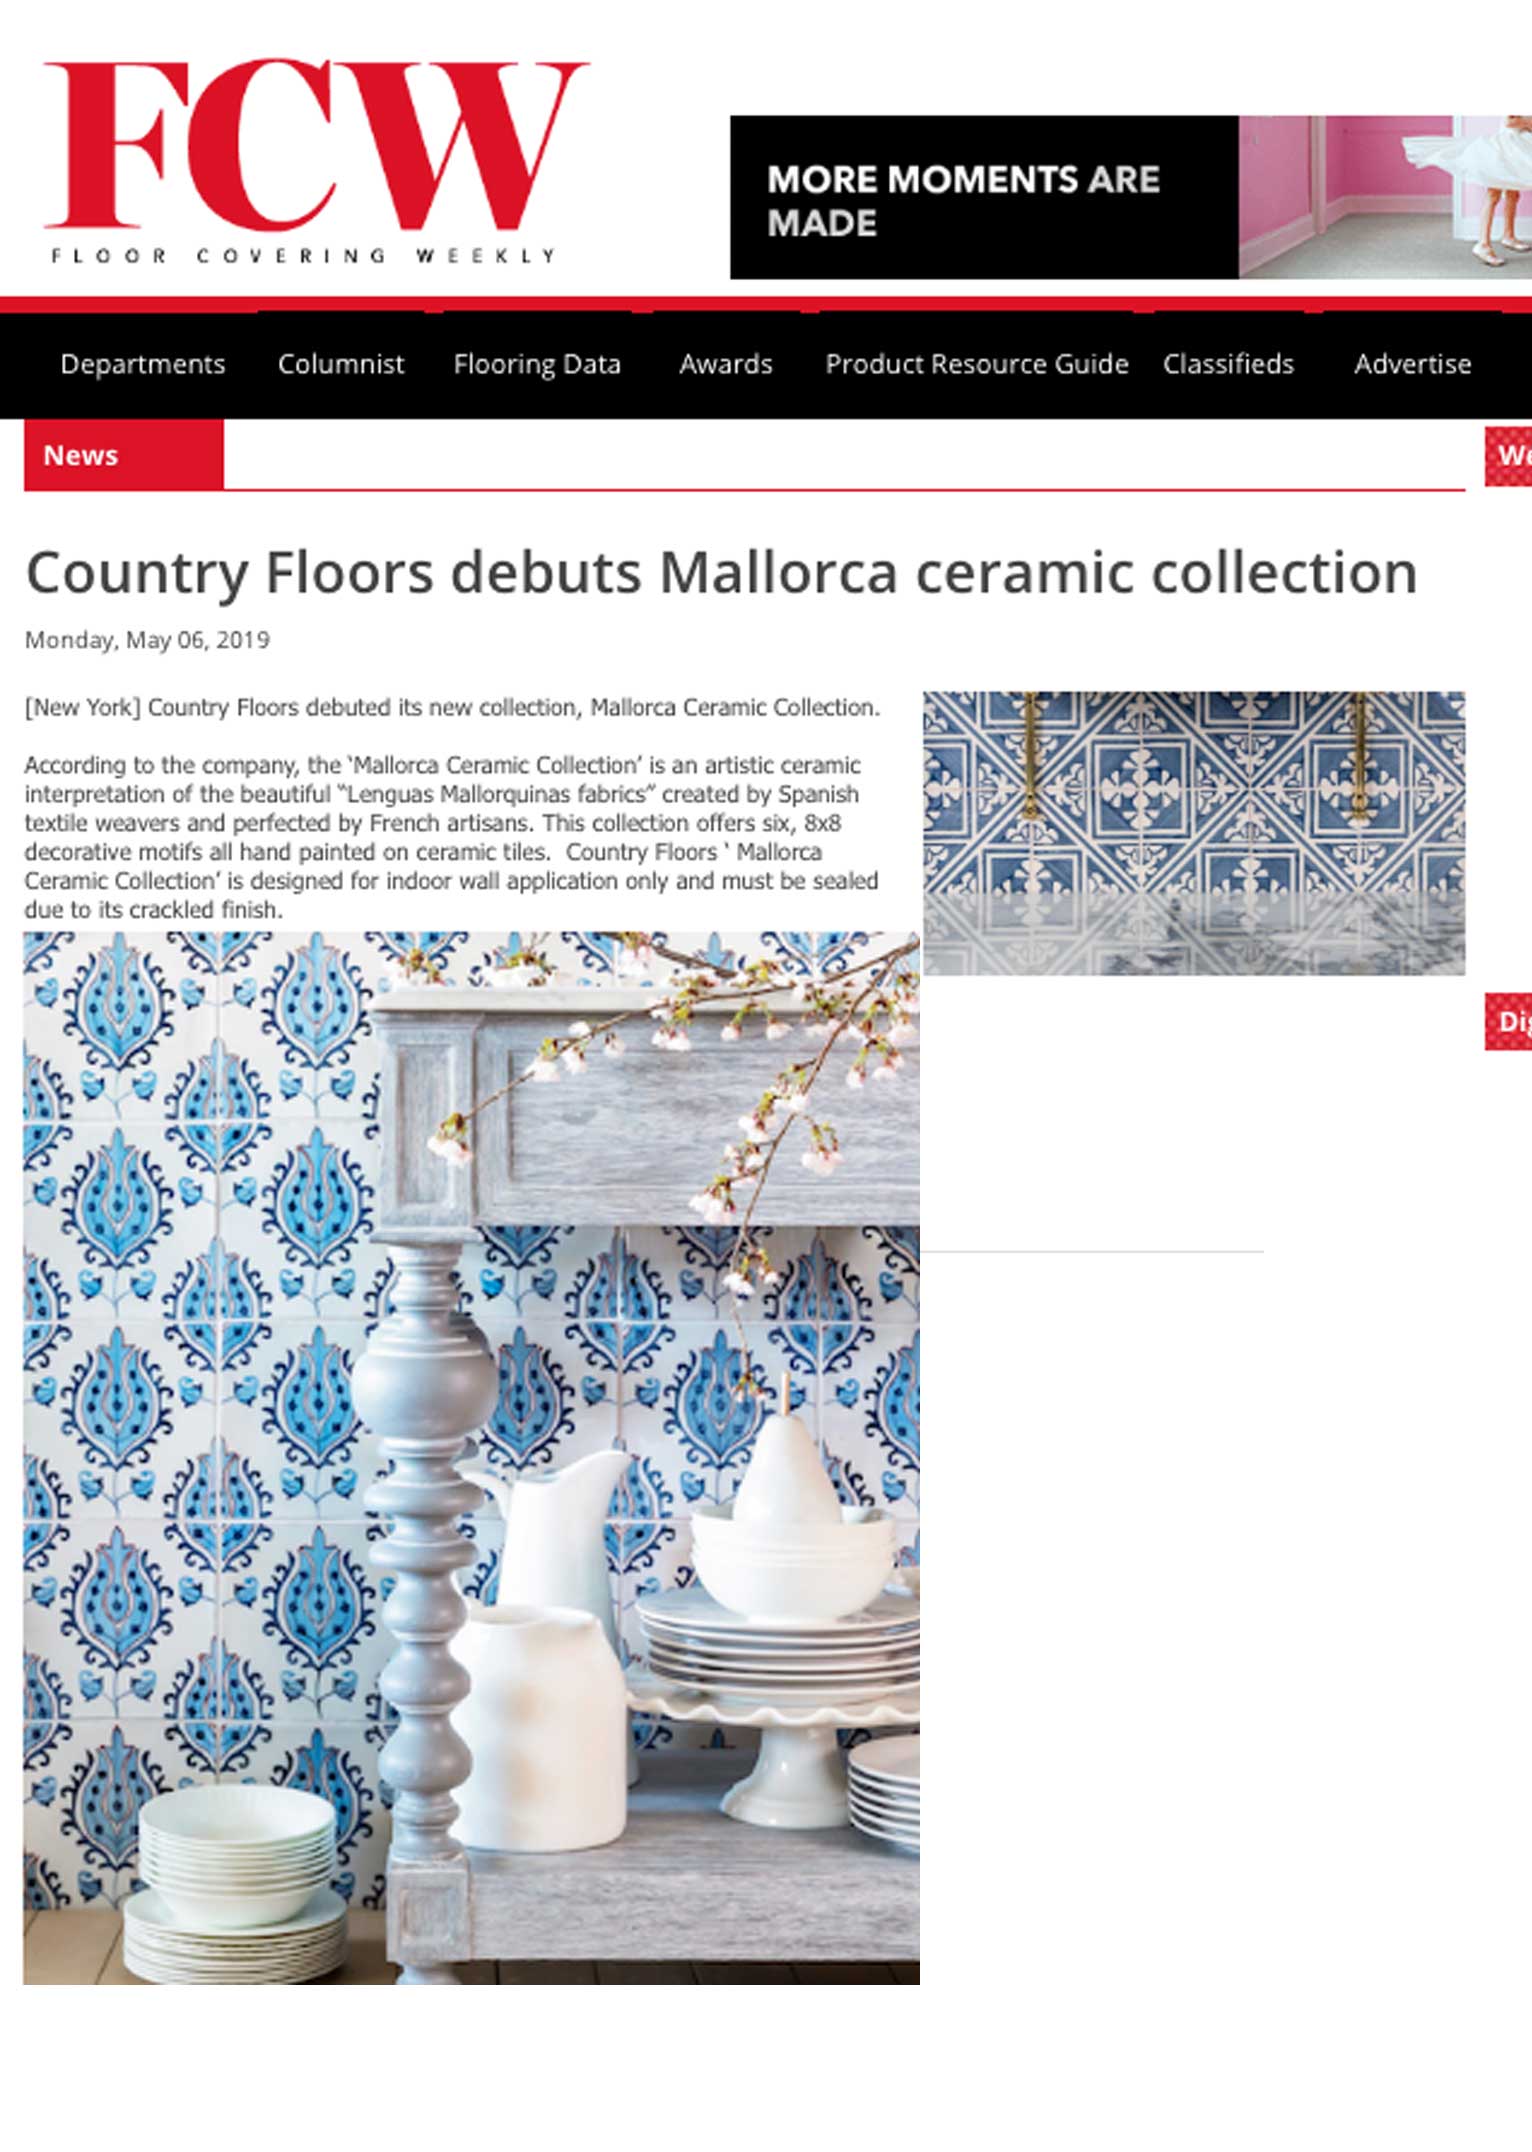 Floor Covering Weekly Featuring Mallorca Ceramic Collection